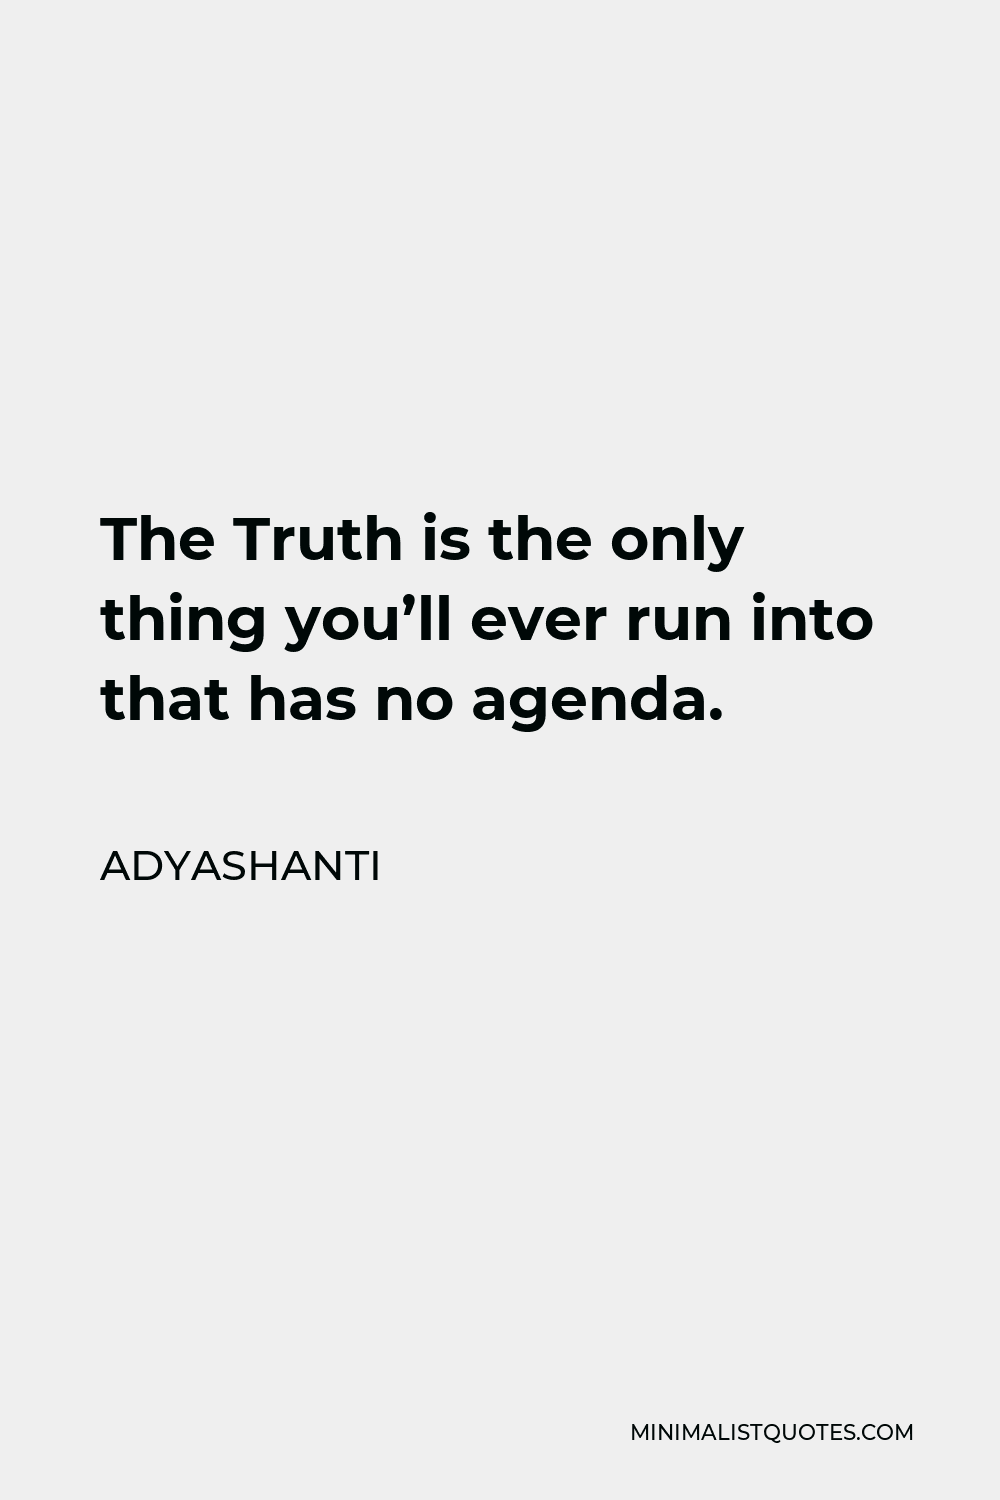 Adyashanti Quote - The Truth is the only thing you’ll ever run into that has no agenda.